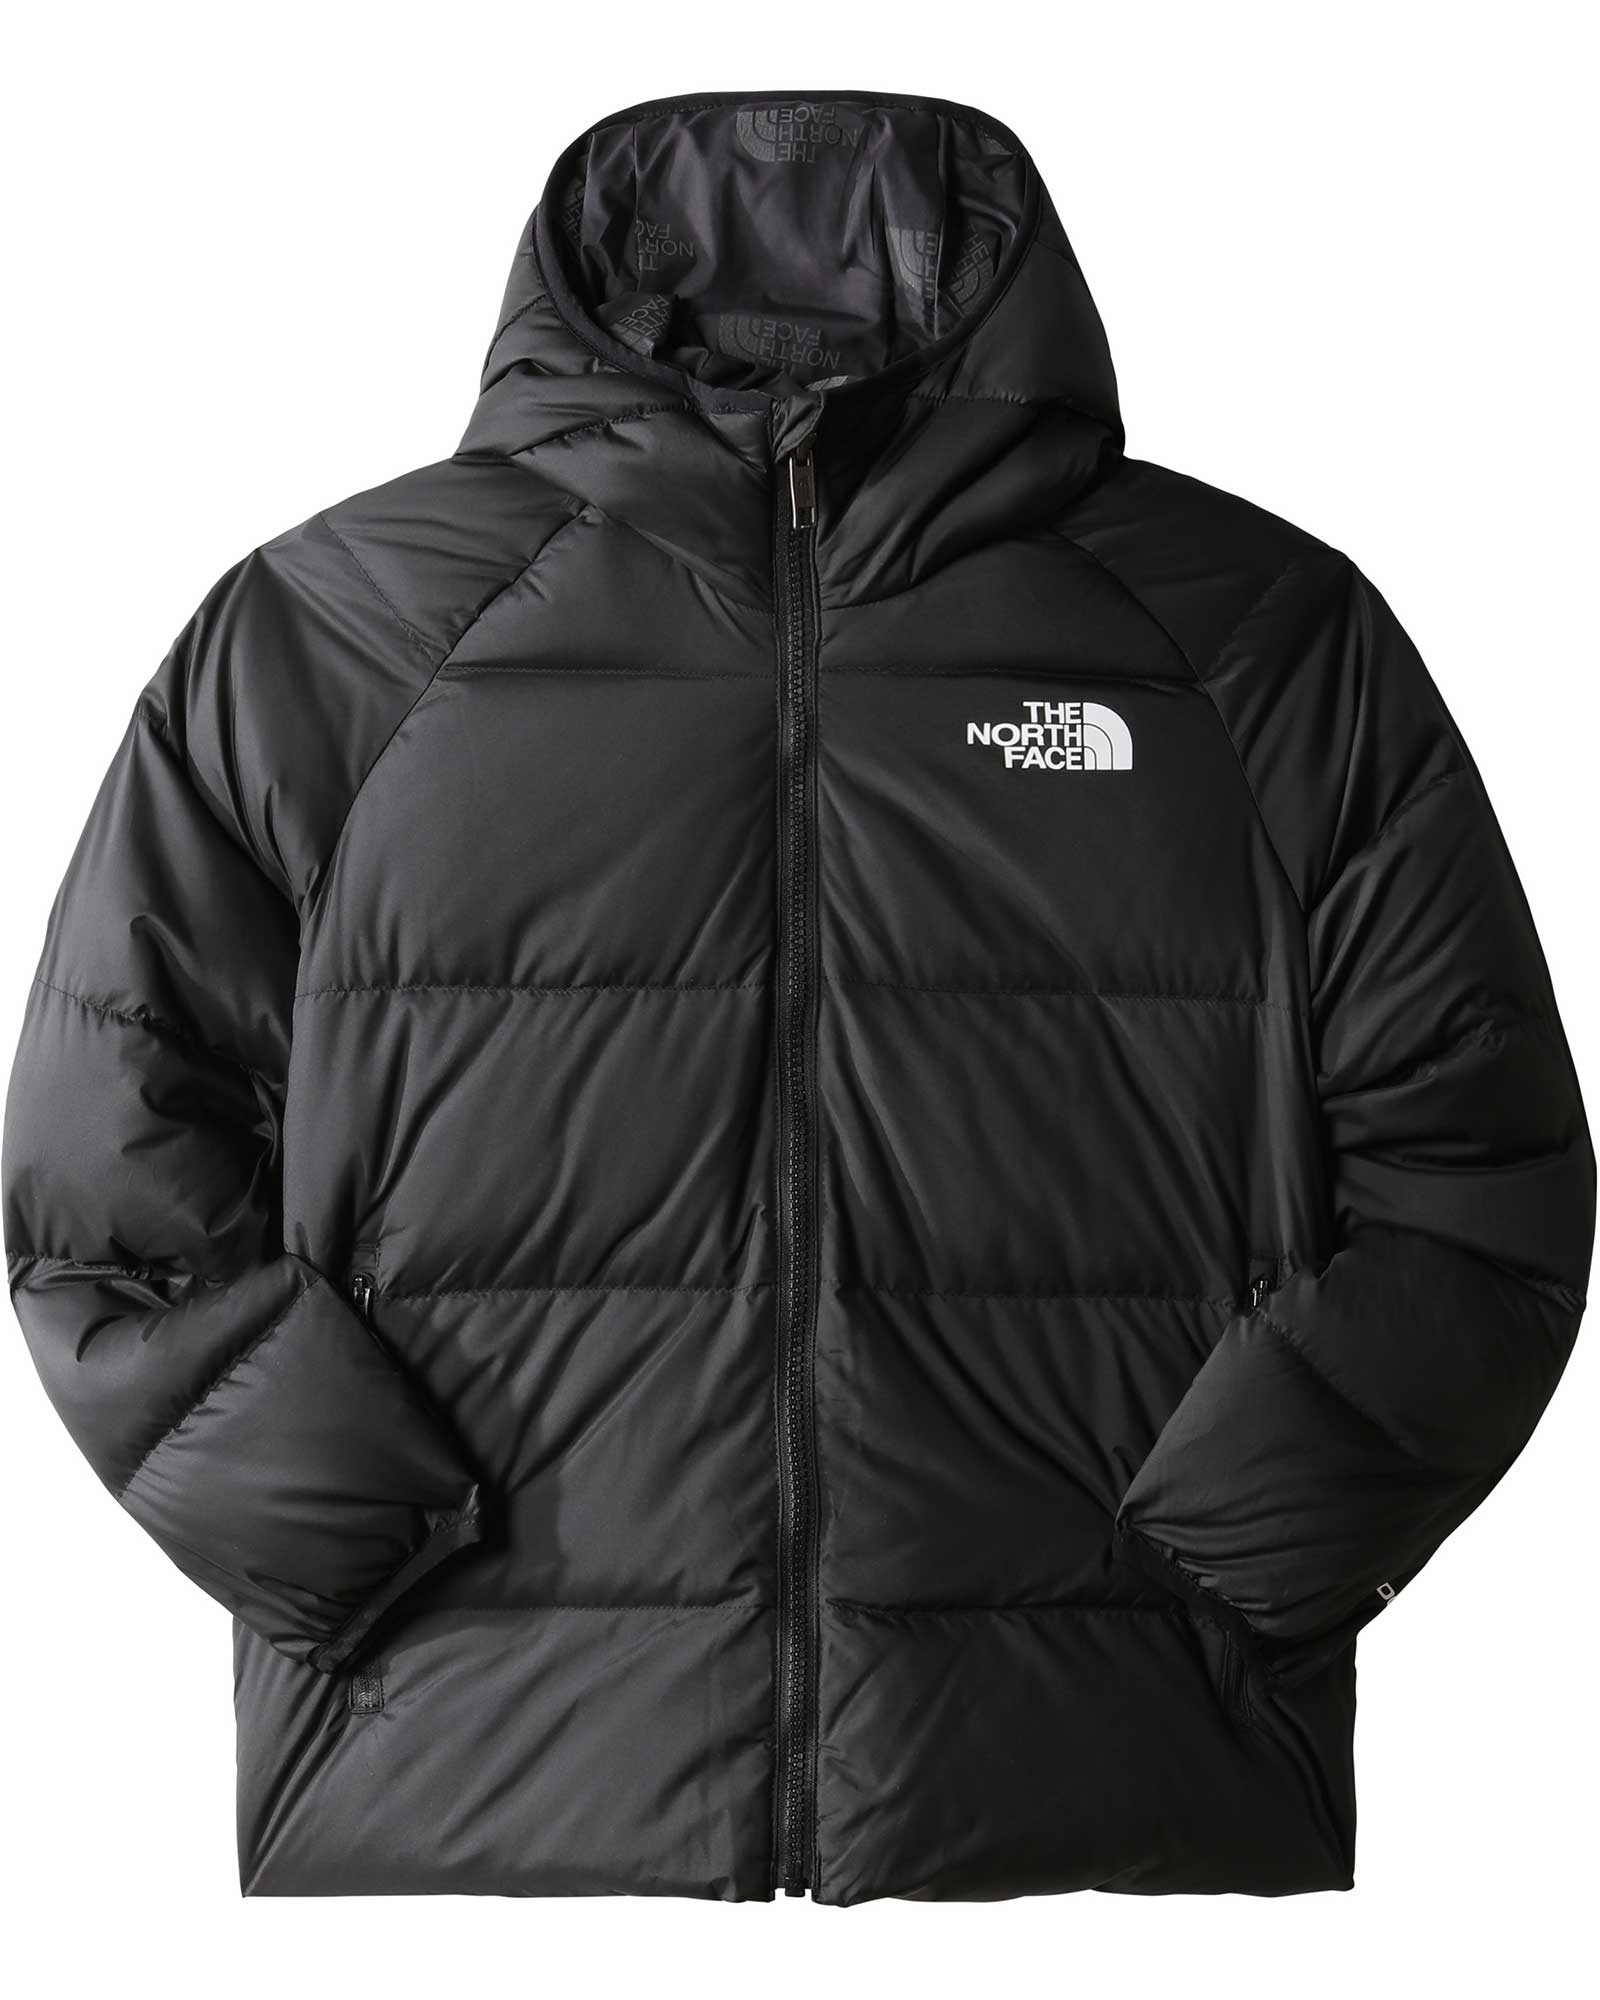 The North Face Print North Kids Down Hooded Jacket